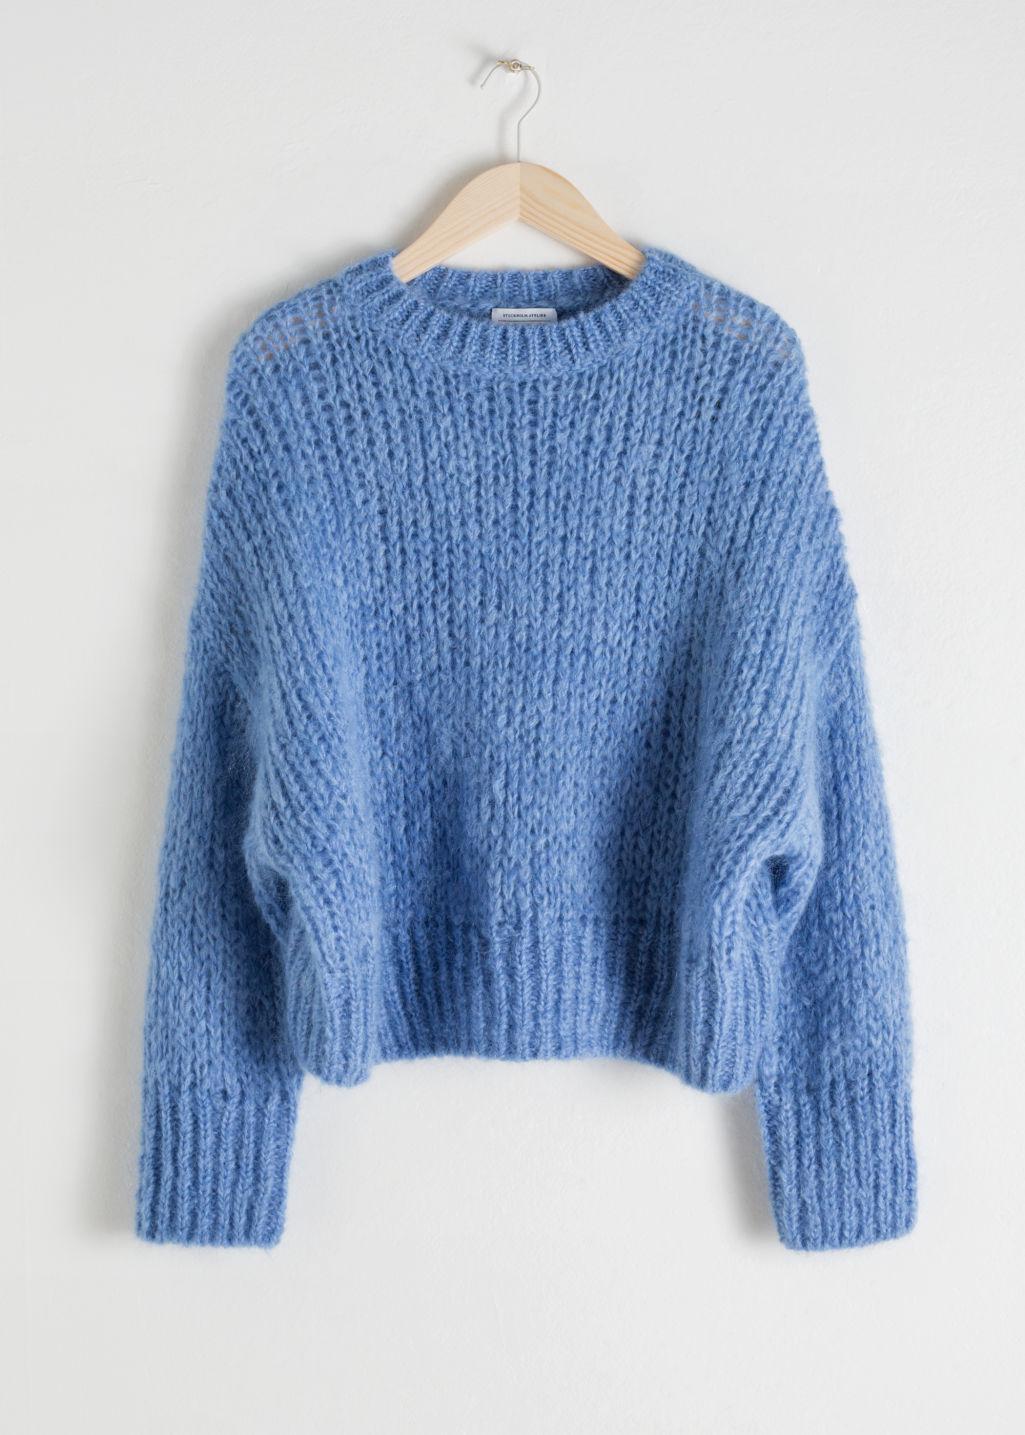  Other Stories Wool Blend Chunky Knit Sweater in Blue